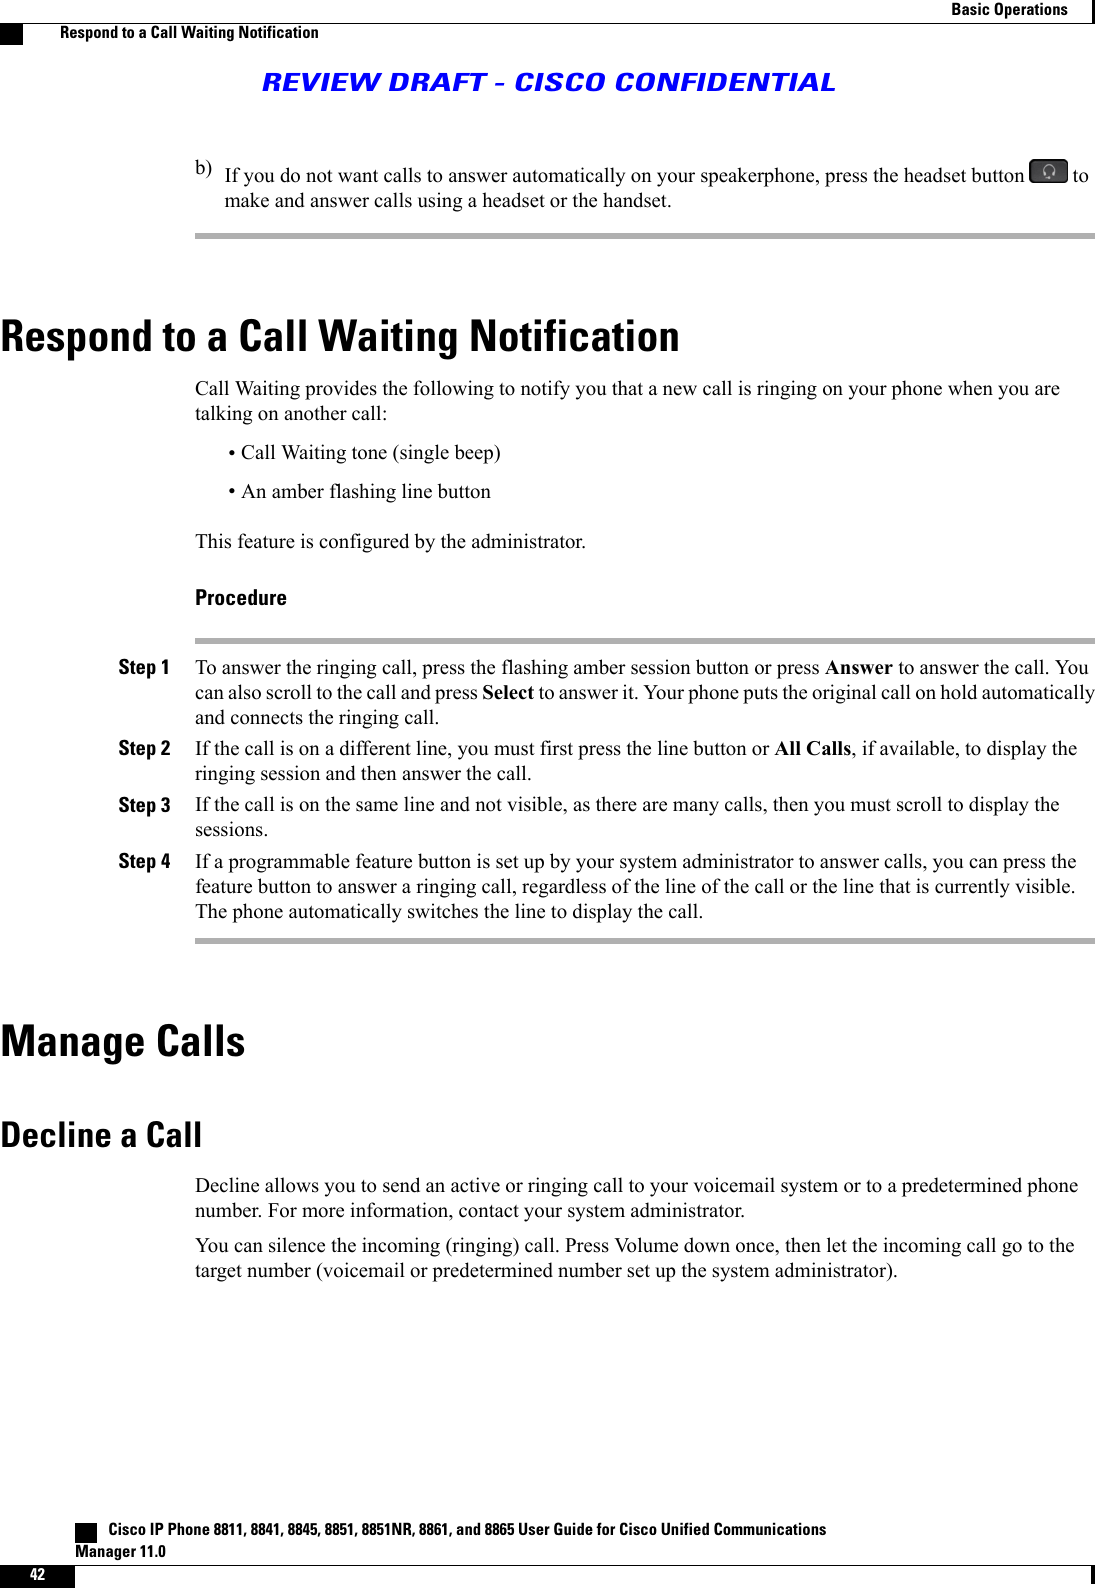 b) If you do not want calls to answer automatically on your speakerphone, press the headset button tomake and answer calls using a headset or the handset.Respond to a Call Waiting NotificationCall Waiting provides the following to notify you that a new call is ringing on your phone when you aretalking on another call:•Call Waiting tone (single beep)•An amber flashing line buttonThis feature is configured by the administrator.ProcedureStep 1 To answer the ringing call, press the flashing amber session button or press Answer to answer the call. Youcan also scroll to the call and press Select to answer it. Your phone puts the original call on hold automaticallyand connects the ringing call.Step 2 If the call is on a different line, you must first press the line button or All Calls, if available, to display theringing session and then answer the call.Step 3 If the call is on the same line and not visible, as there are many calls, then you must scroll to display thesessions.Step 4 If a programmable feature button is set up by your system administrator to answer calls, you can press thefeature button to answer a ringing call, regardless of the line of the call or the line that is currently visible.The phone automatically switches the line to display the call.Manage CallsDecline a CallDecline allows you to send an active or ringing call to your voicemail system or to a predetermined phonenumber. For more information, contact your system administrator.You can silence the incoming (ringing) call. Press Volume down once, then let the incoming call go to thetarget number (voicemail or predetermined number set up the system administrator).   Cisco IP Phone 8811, 8841, 8845, 8851, 8851NR, 8861, and 8865 User Guide for Cisco Unified CommunicationsManager 11.042Basic OperationsRespond to a Call Waiting NotificationREVIEW DRAFT - CISCO CONFIDENTIAL